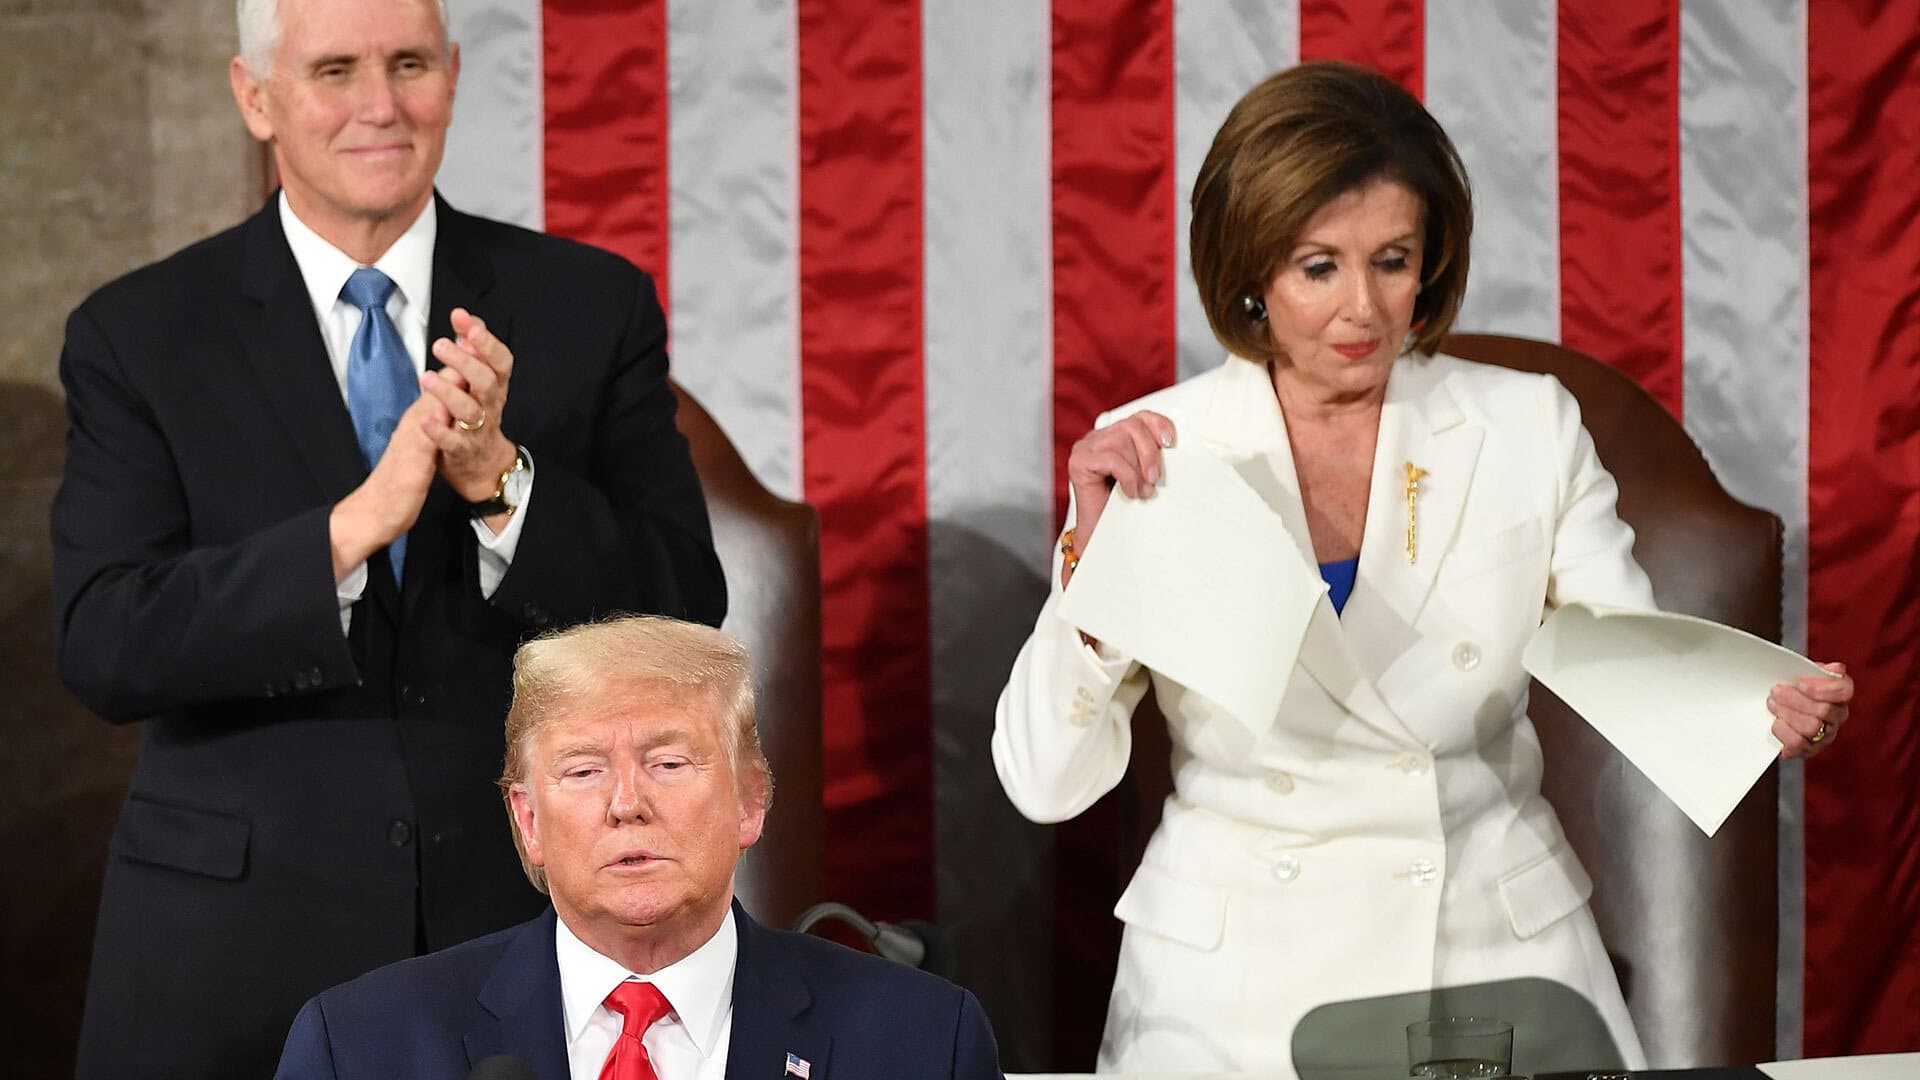 Speaker of the House Nancy Pelosi rips up her copy of President Donald Trump's State of the Union speech after Trump's remarks on Tuesday.